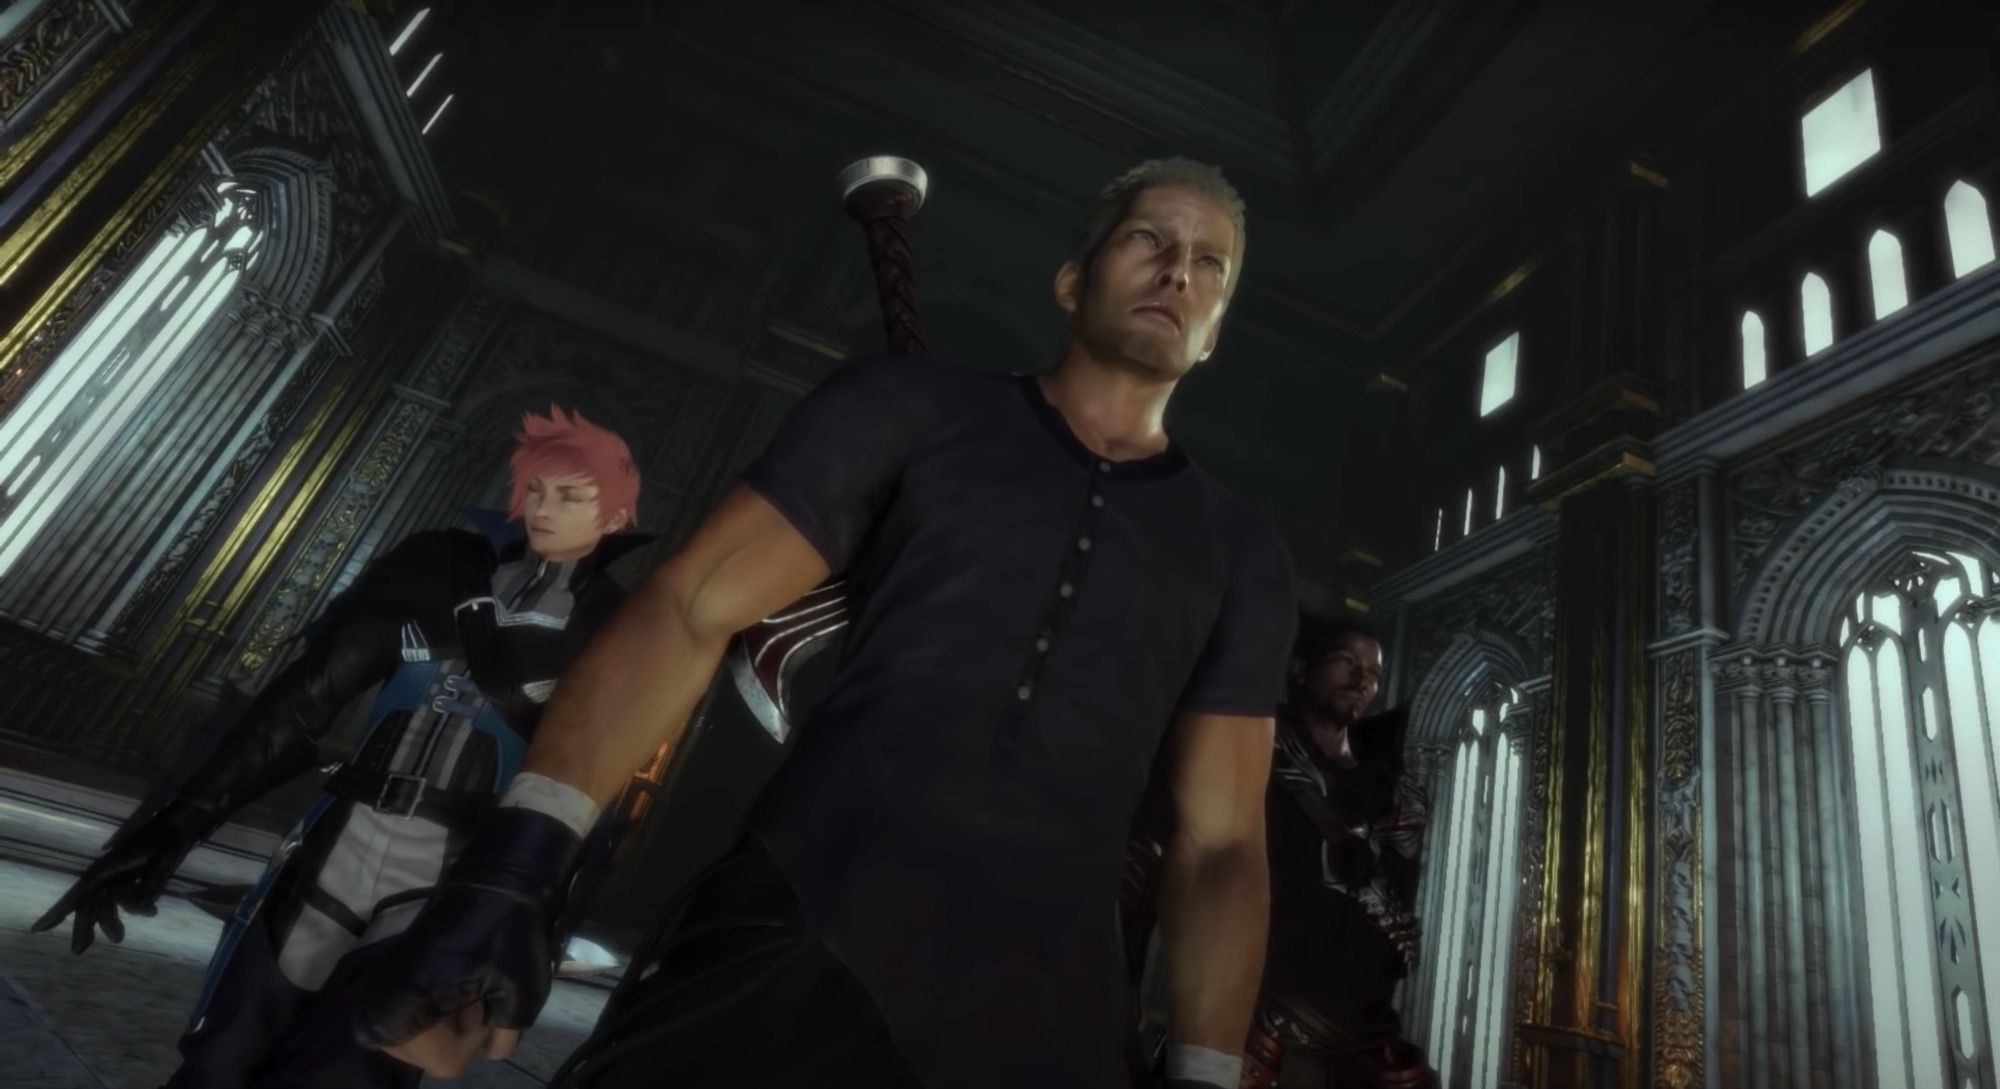 Stranger In Paradise Final Fantasy Origin Is A Messy Gory Spin On Gaming Royalty Engadget